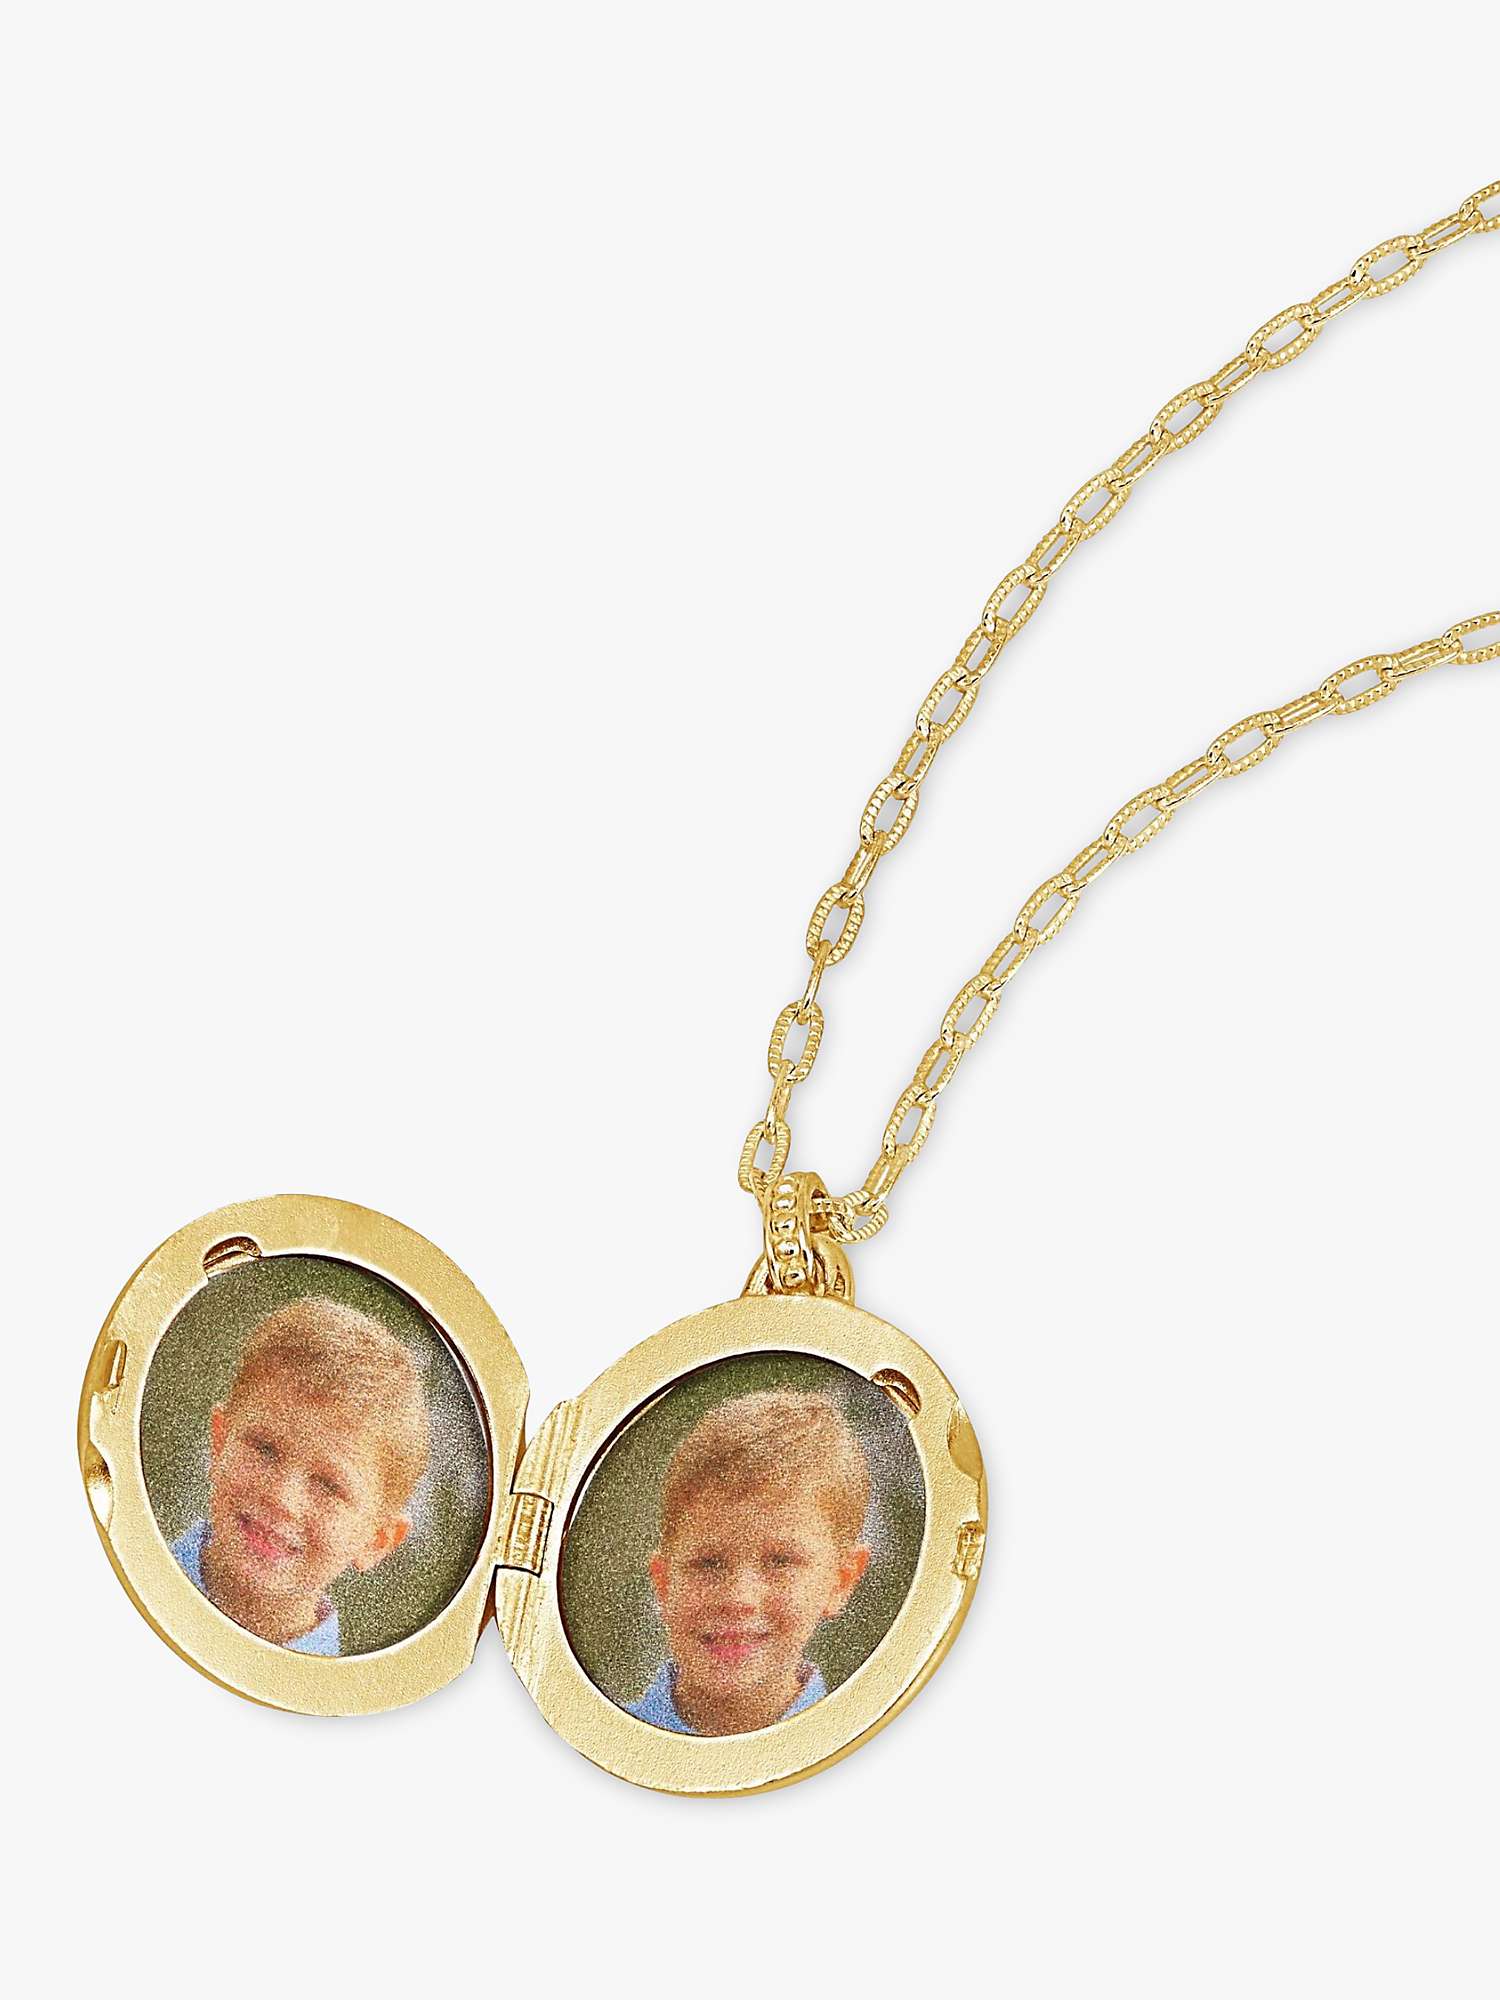 Buy Dower & Hall Tree of Life Locket on Textured Mille-Grain Chain Online at johnlewis.com